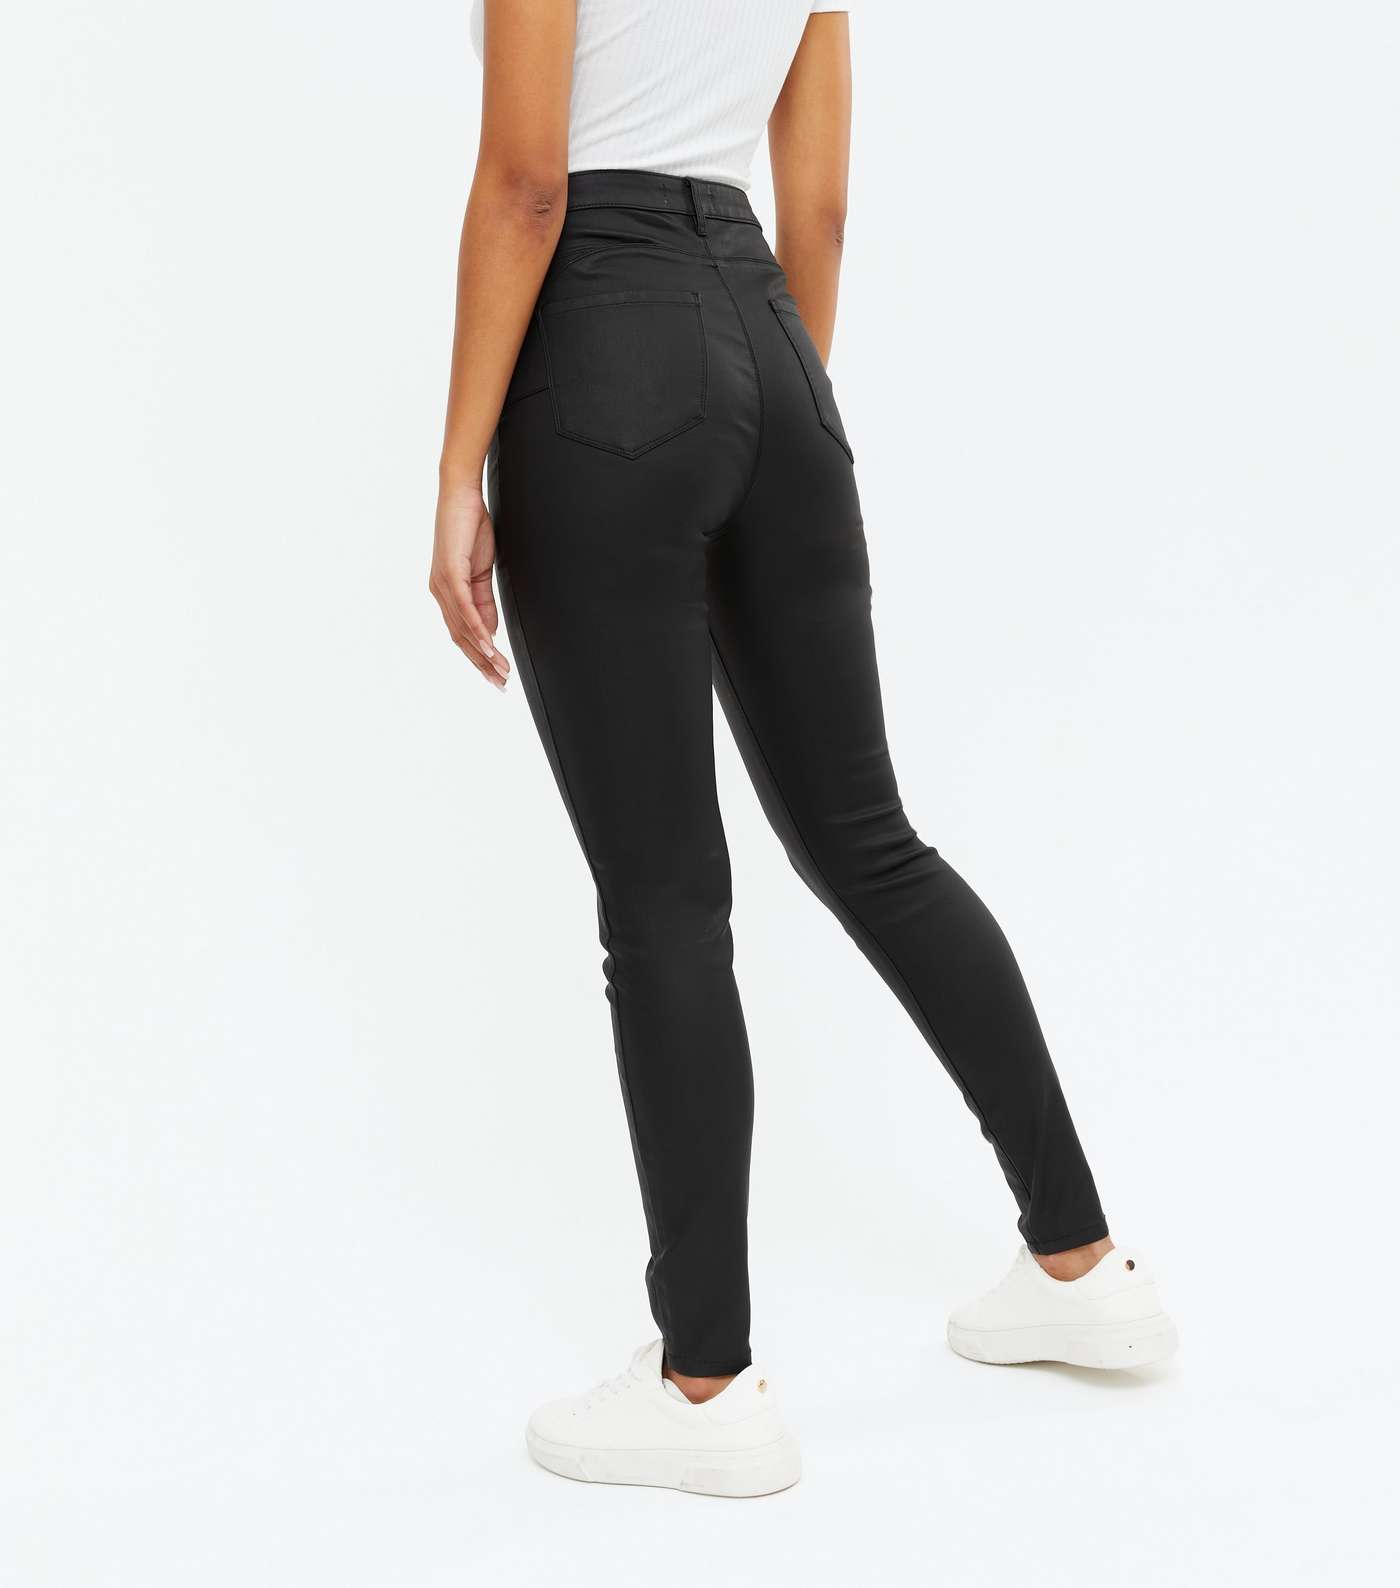 Urban Bliss Black Leather-Look Shaper Jeans Image 4